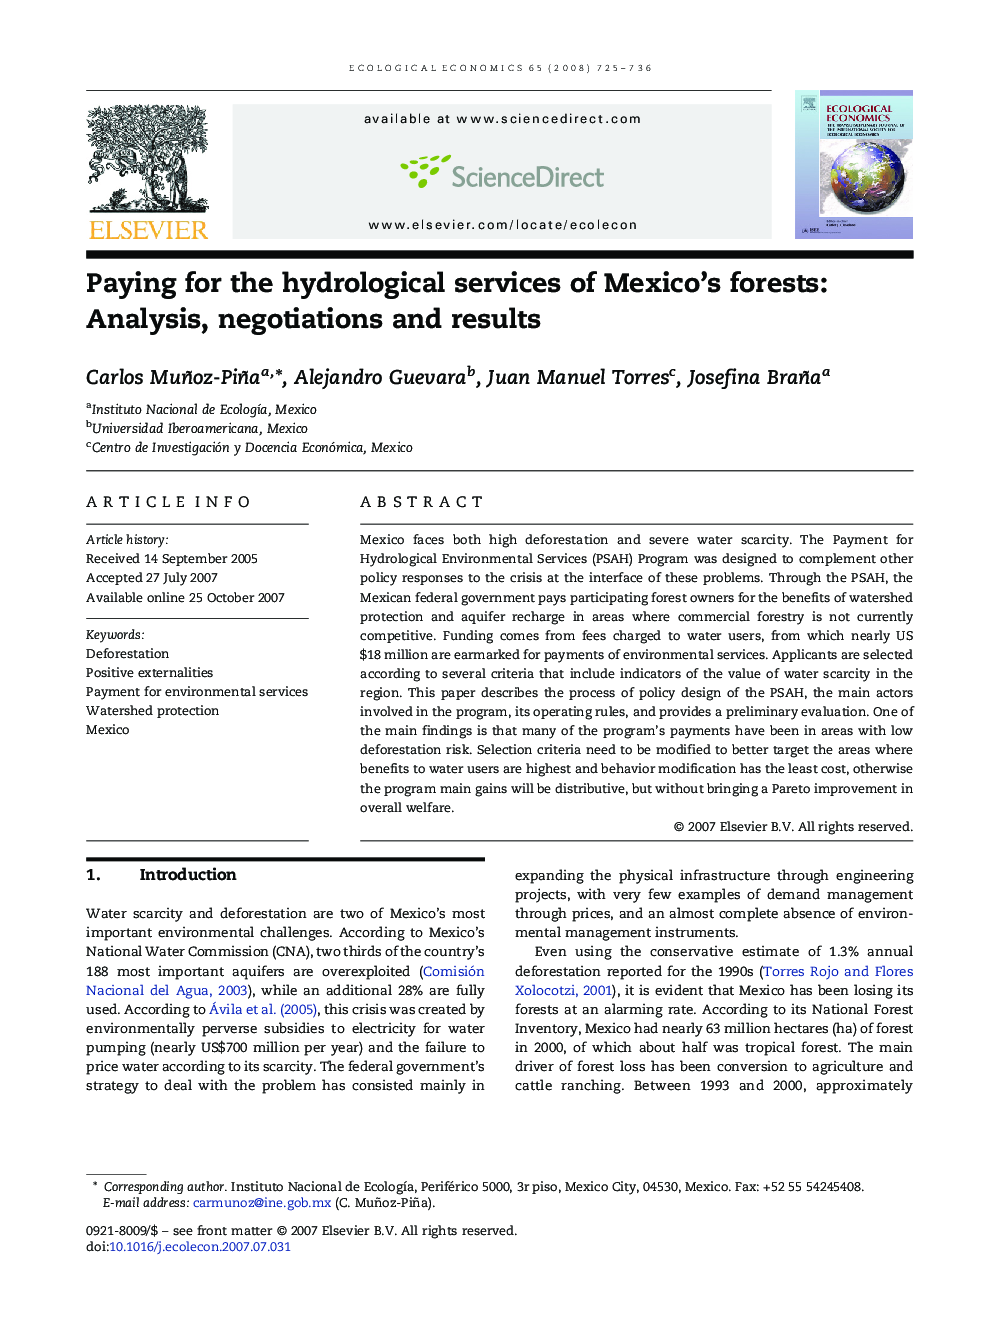 Paying for the hydrological services of Mexico's forests: Analysis, negotiations and results